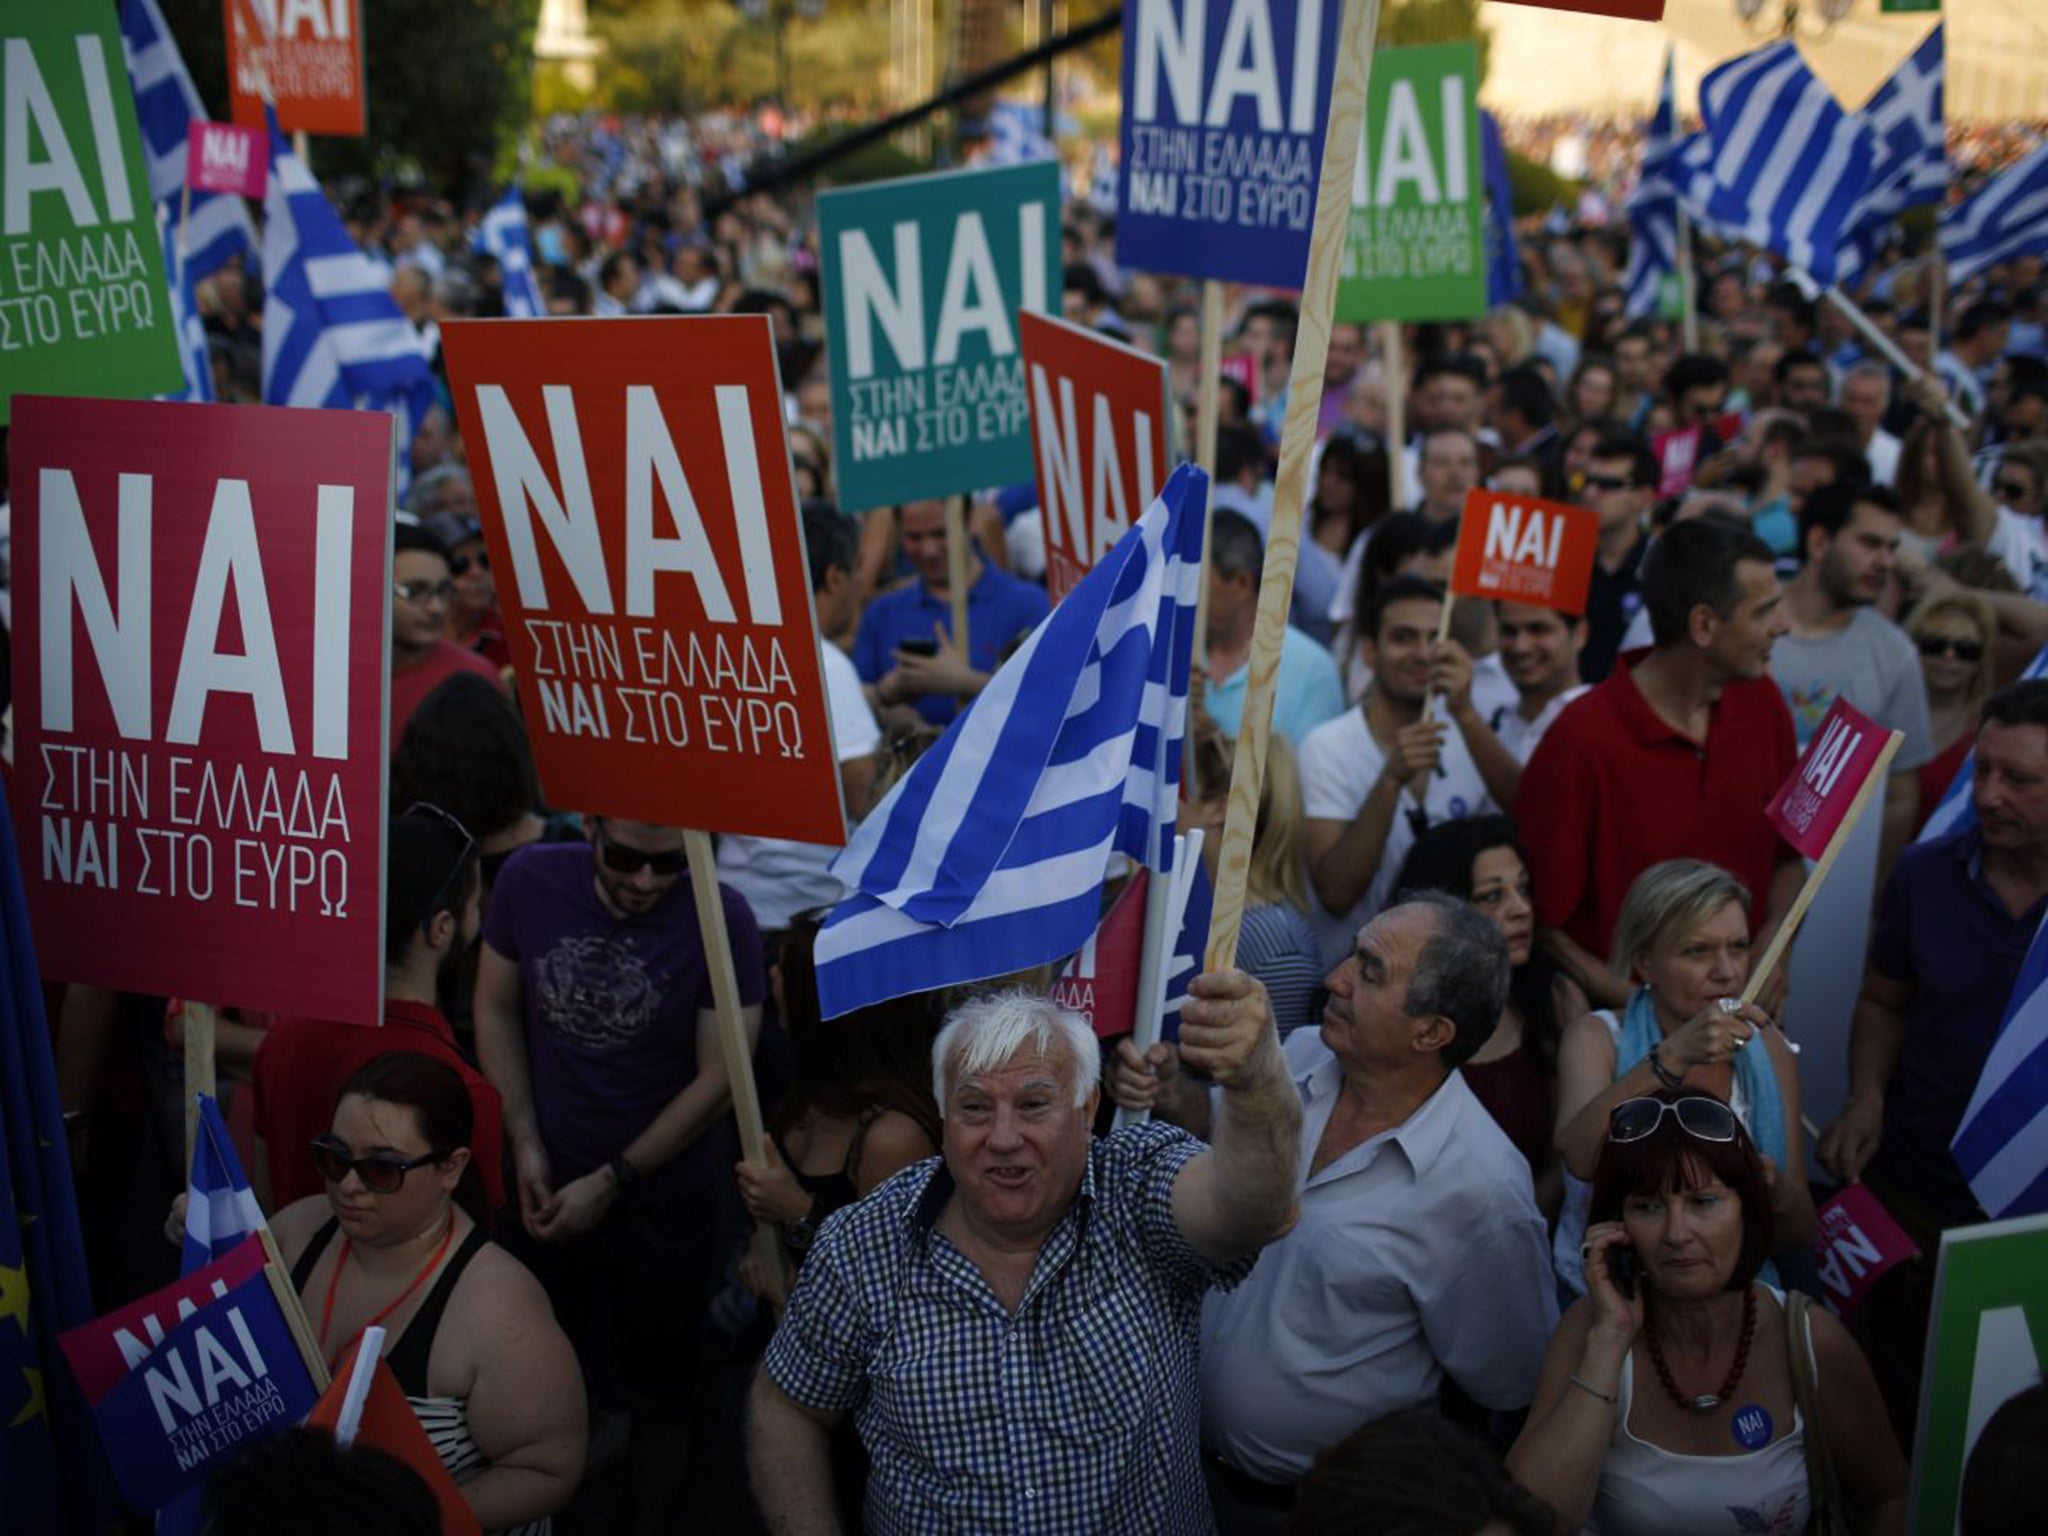 Protesters on both sides of the argument ('No' pictured here) have rallied in Athens